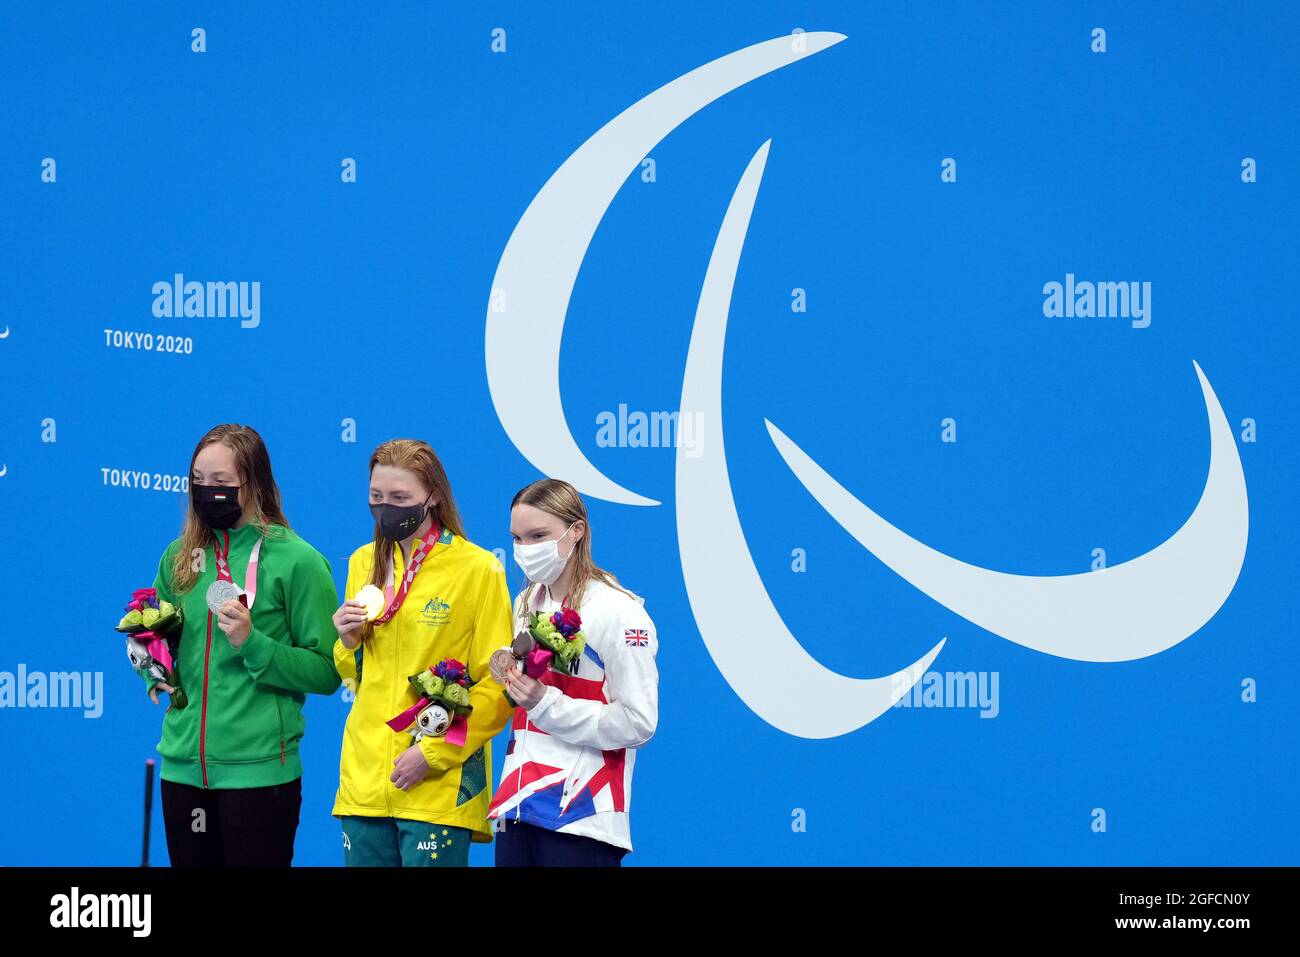 Great Britain's Toni Shaw (right) celebrates with the bronze medal, Hungary's Zsofia Konkoly (left) with the silver and Australia's Lakeisha Patterson with the gold after the Women's 400m Freestyle - S9 Final at the Tokyo Aquatics Centre on day one of the Tokyo 2020 Paralympic Games in Japan. Picture date: Wednesday August 25, 2021. Stock Photo